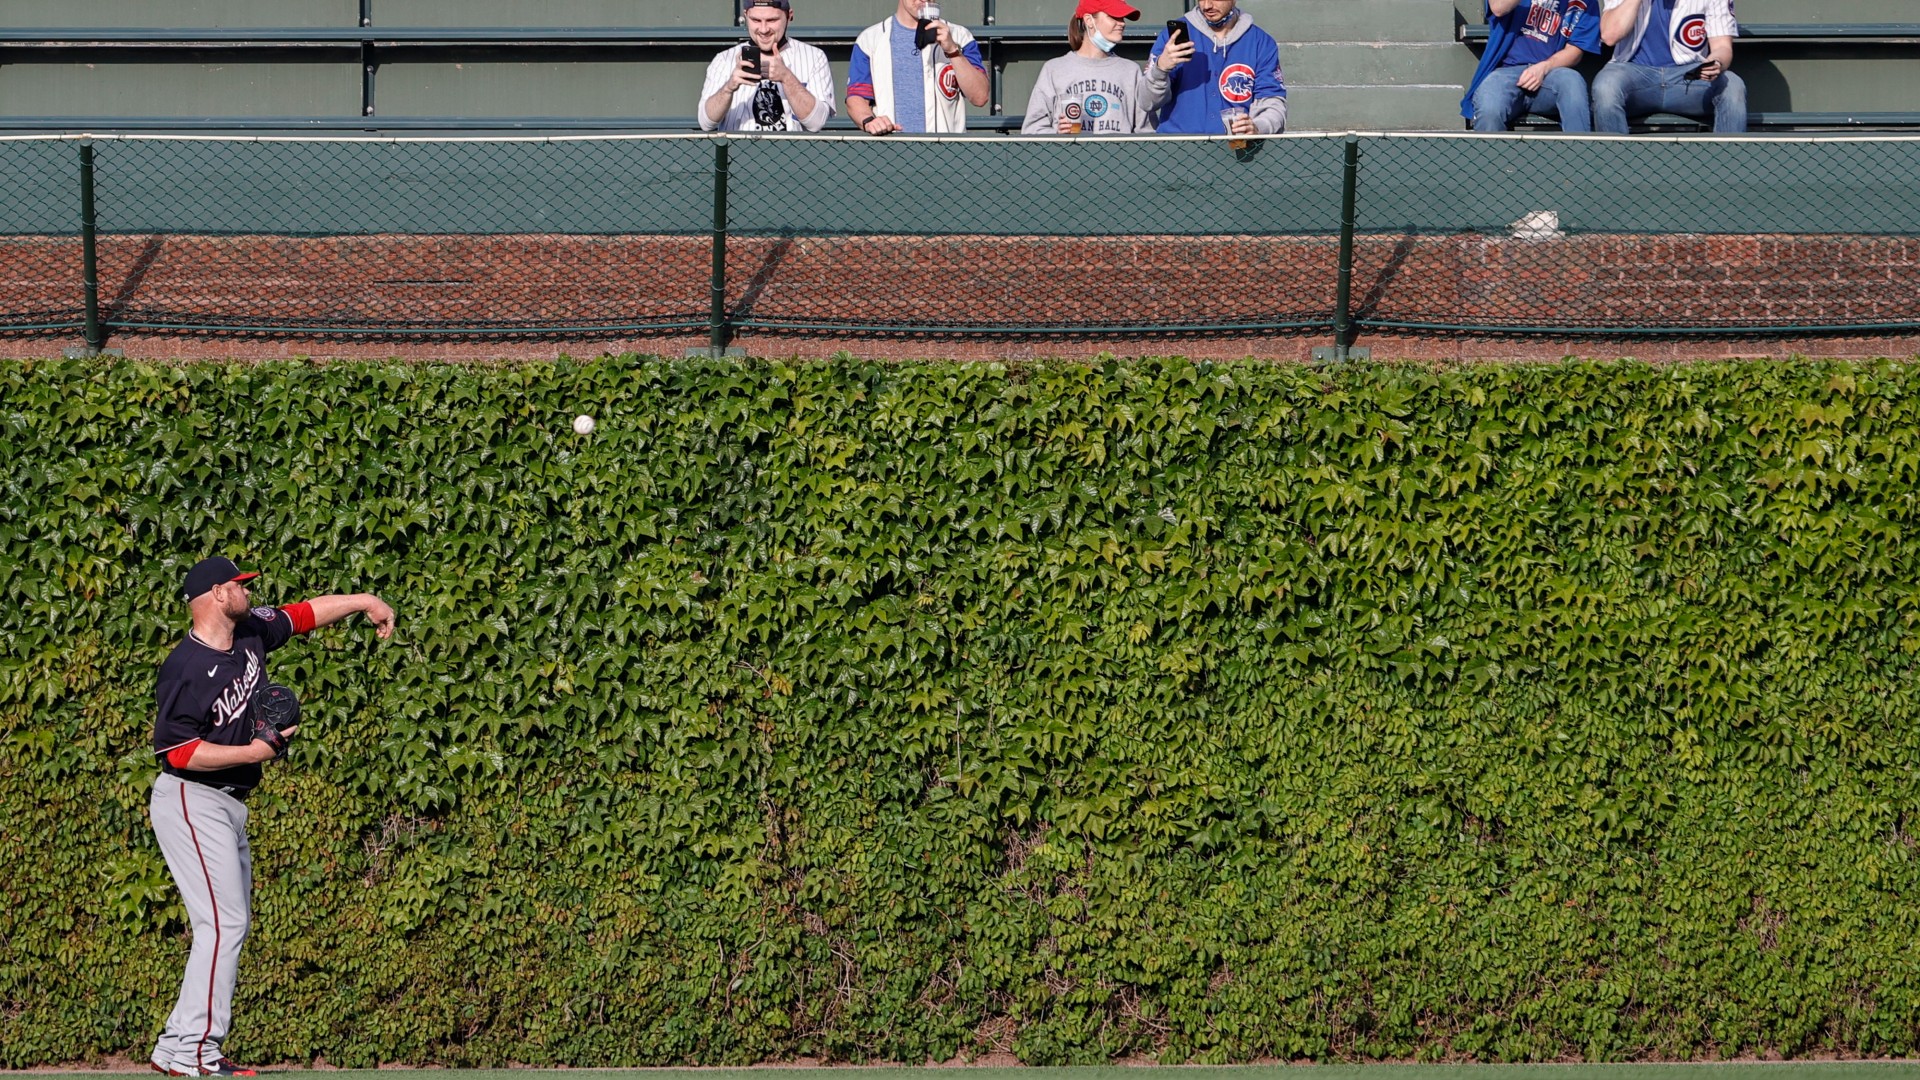 Jon Lester warms up at Wrigley Field